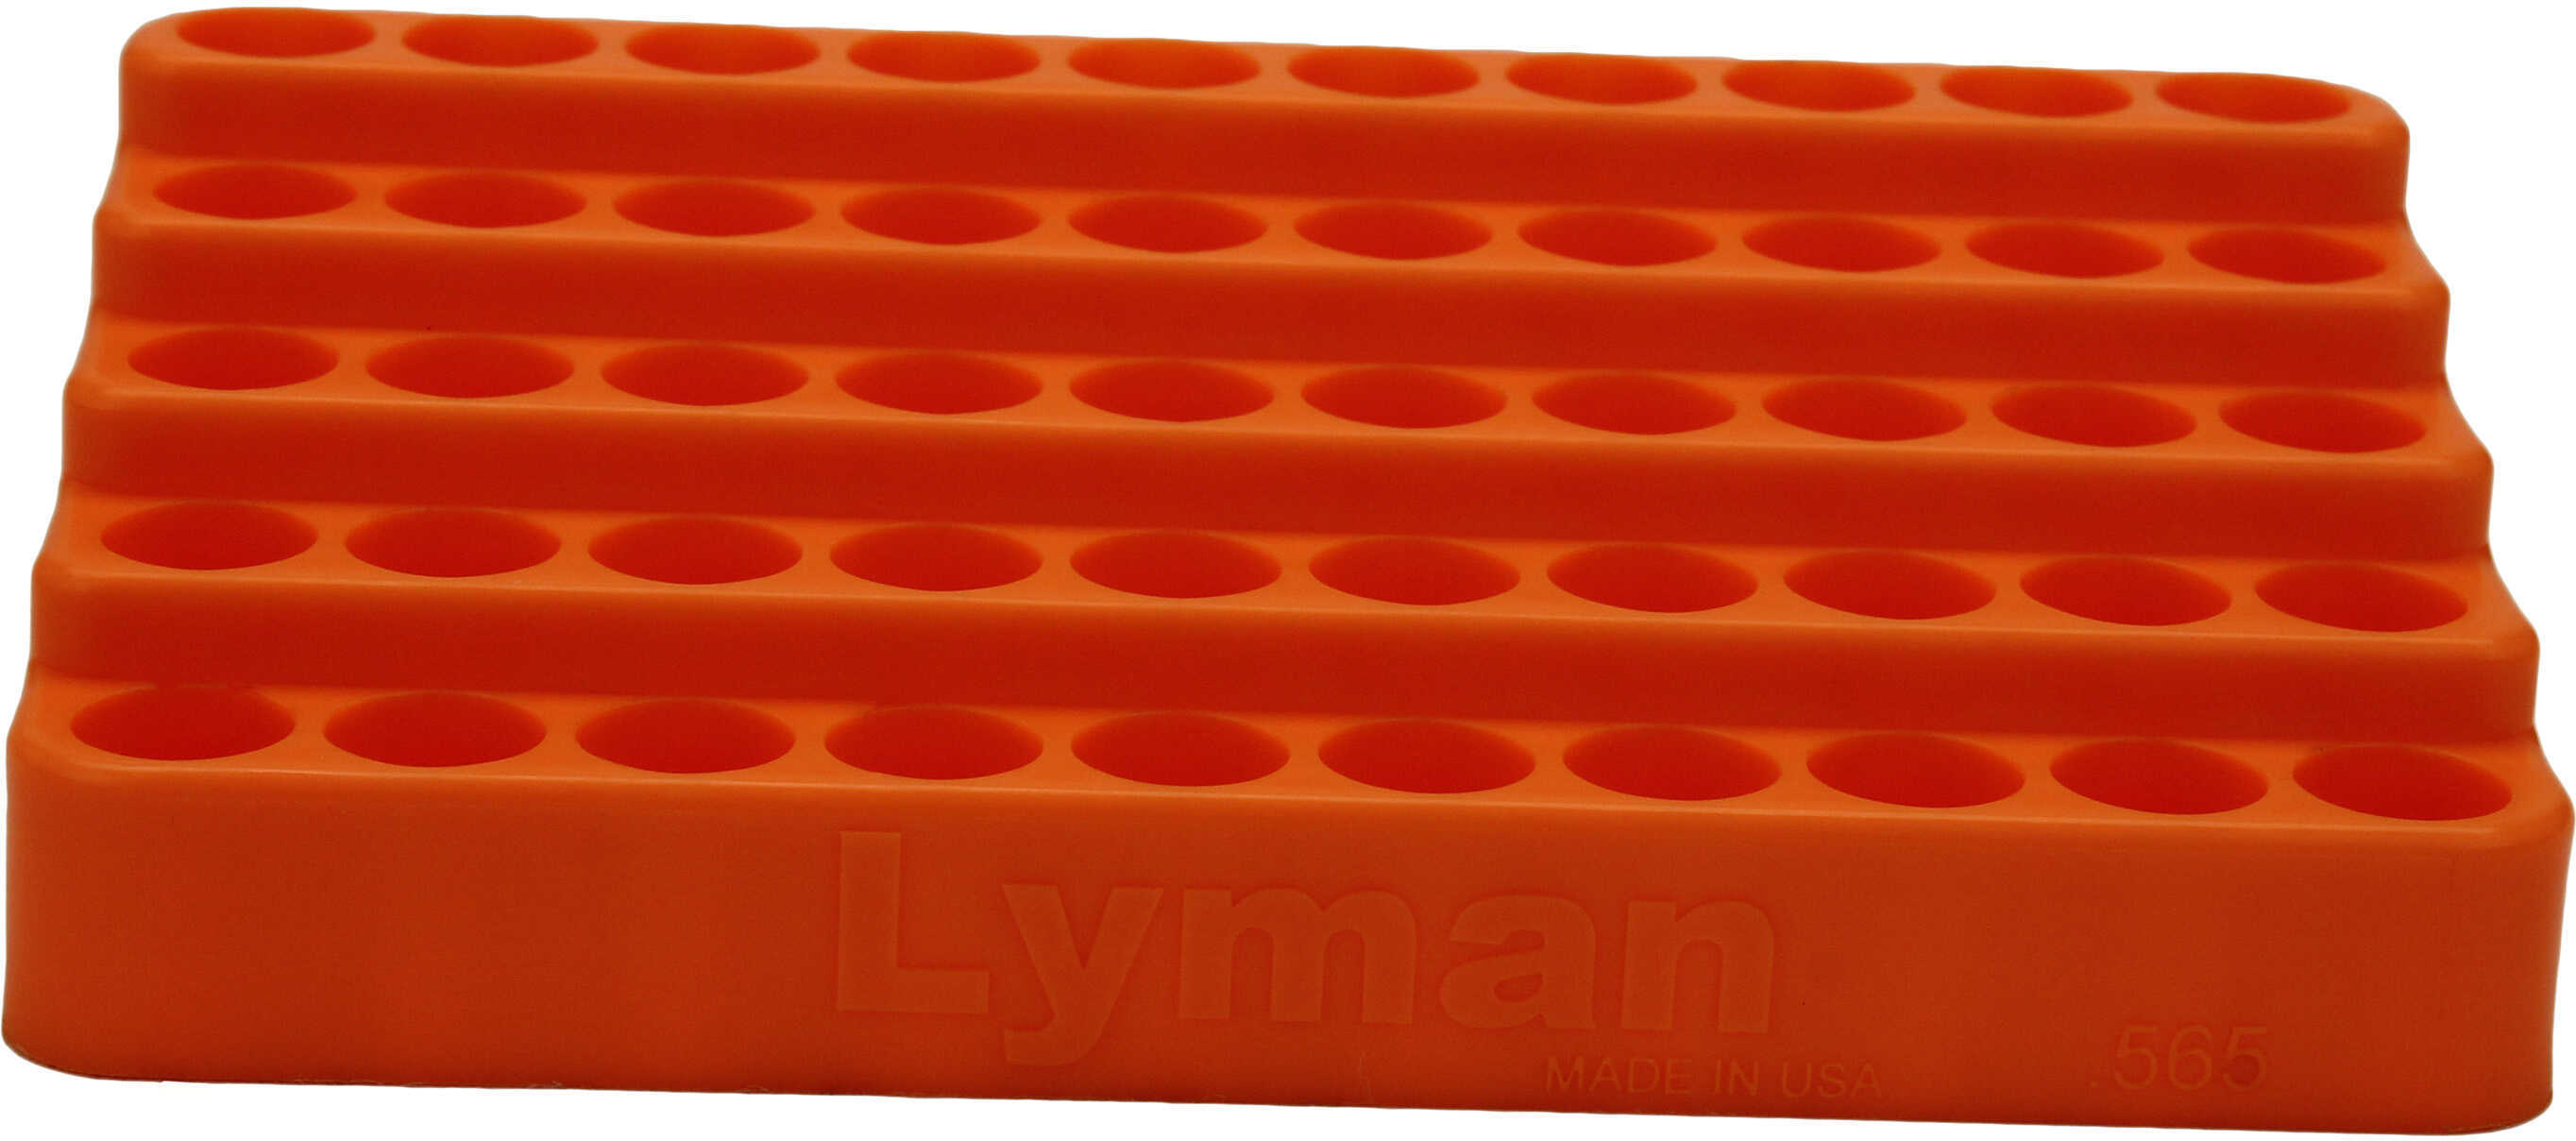 Lyman Bleacher Loading Block Fits Up To 50 Cases Md: 7728087-img-1